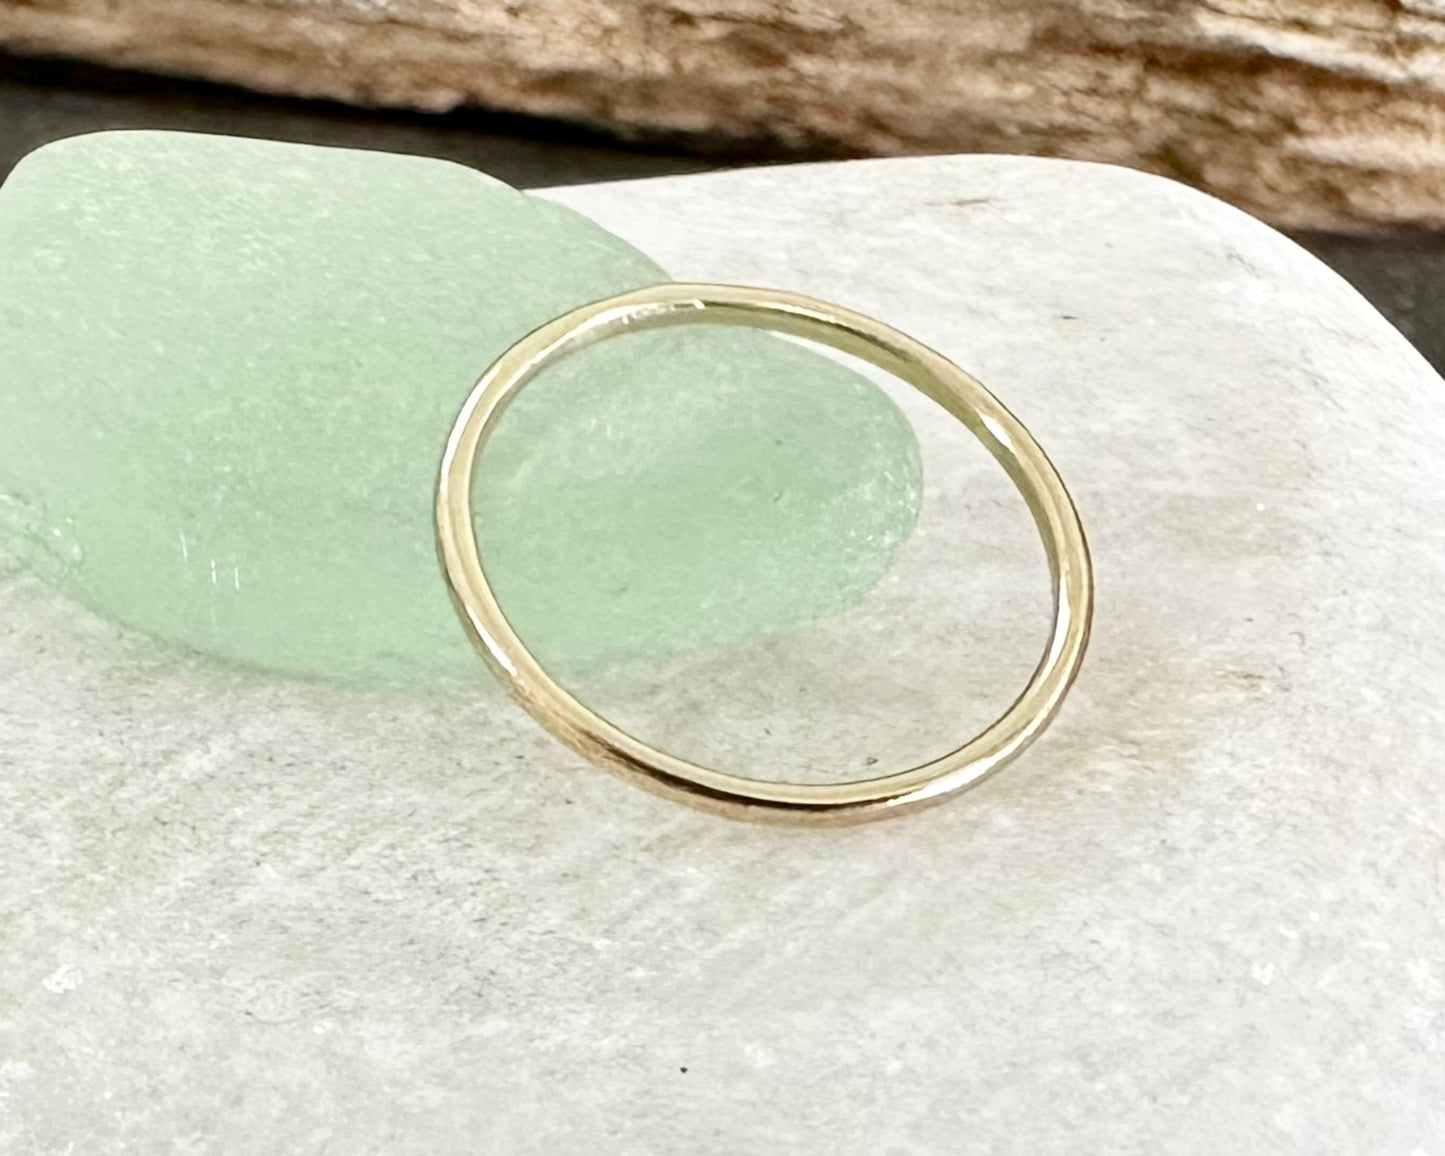 Skinny 1.2mm 9ct Gold Ring, Facet Hammered Effect Minimalist Ring Band, Hadmade Gold Stackable Ring, Wedding Ring